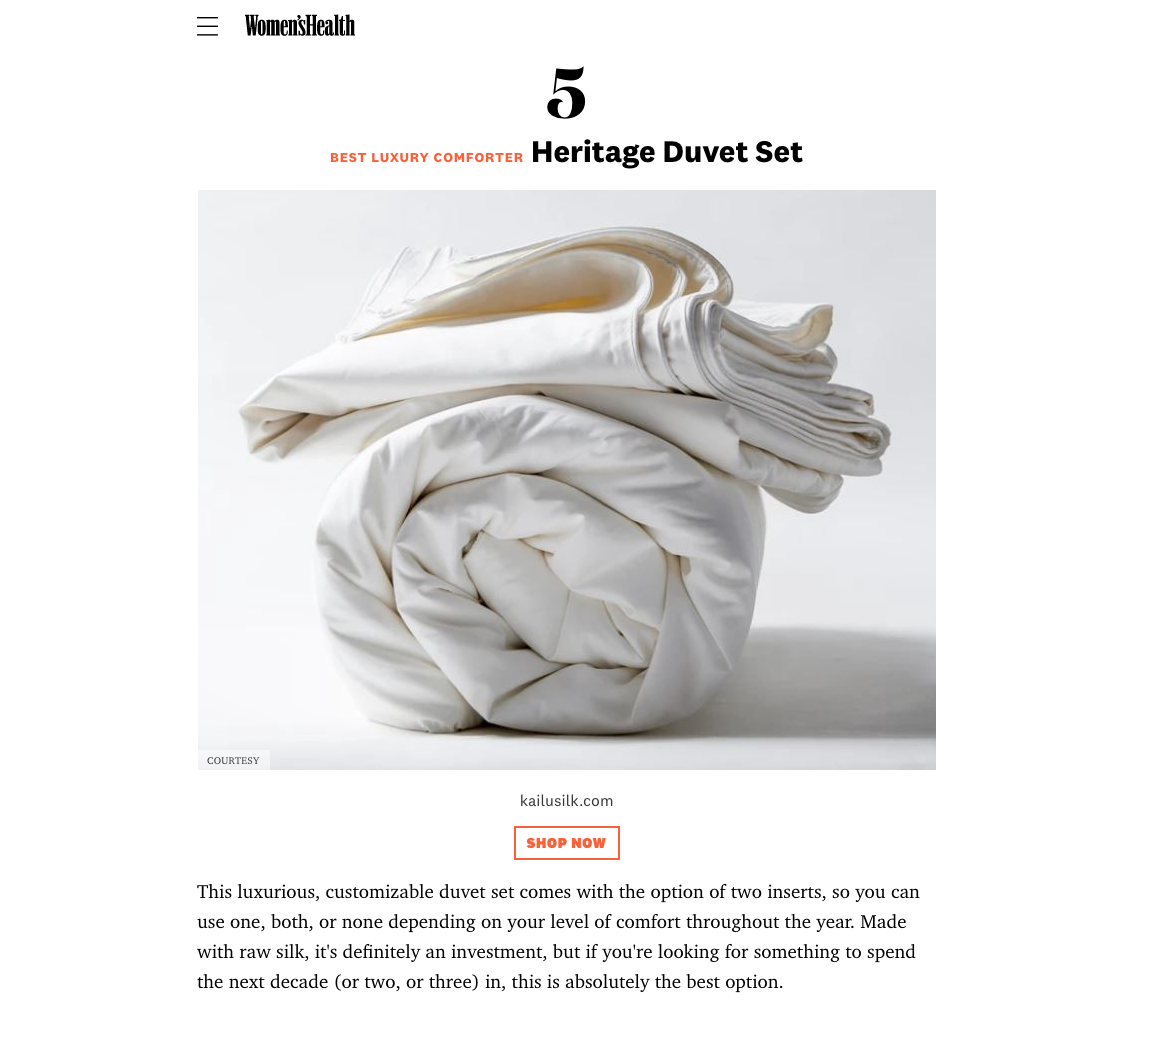 Women's Health Magazine named the KAILU raw silk Heritage Duvet "Best Luxury Comforter" in their story "12 Best Cooling Comforters For Hot Sleepers To Stay Sweat-Free And Dry In 2021"